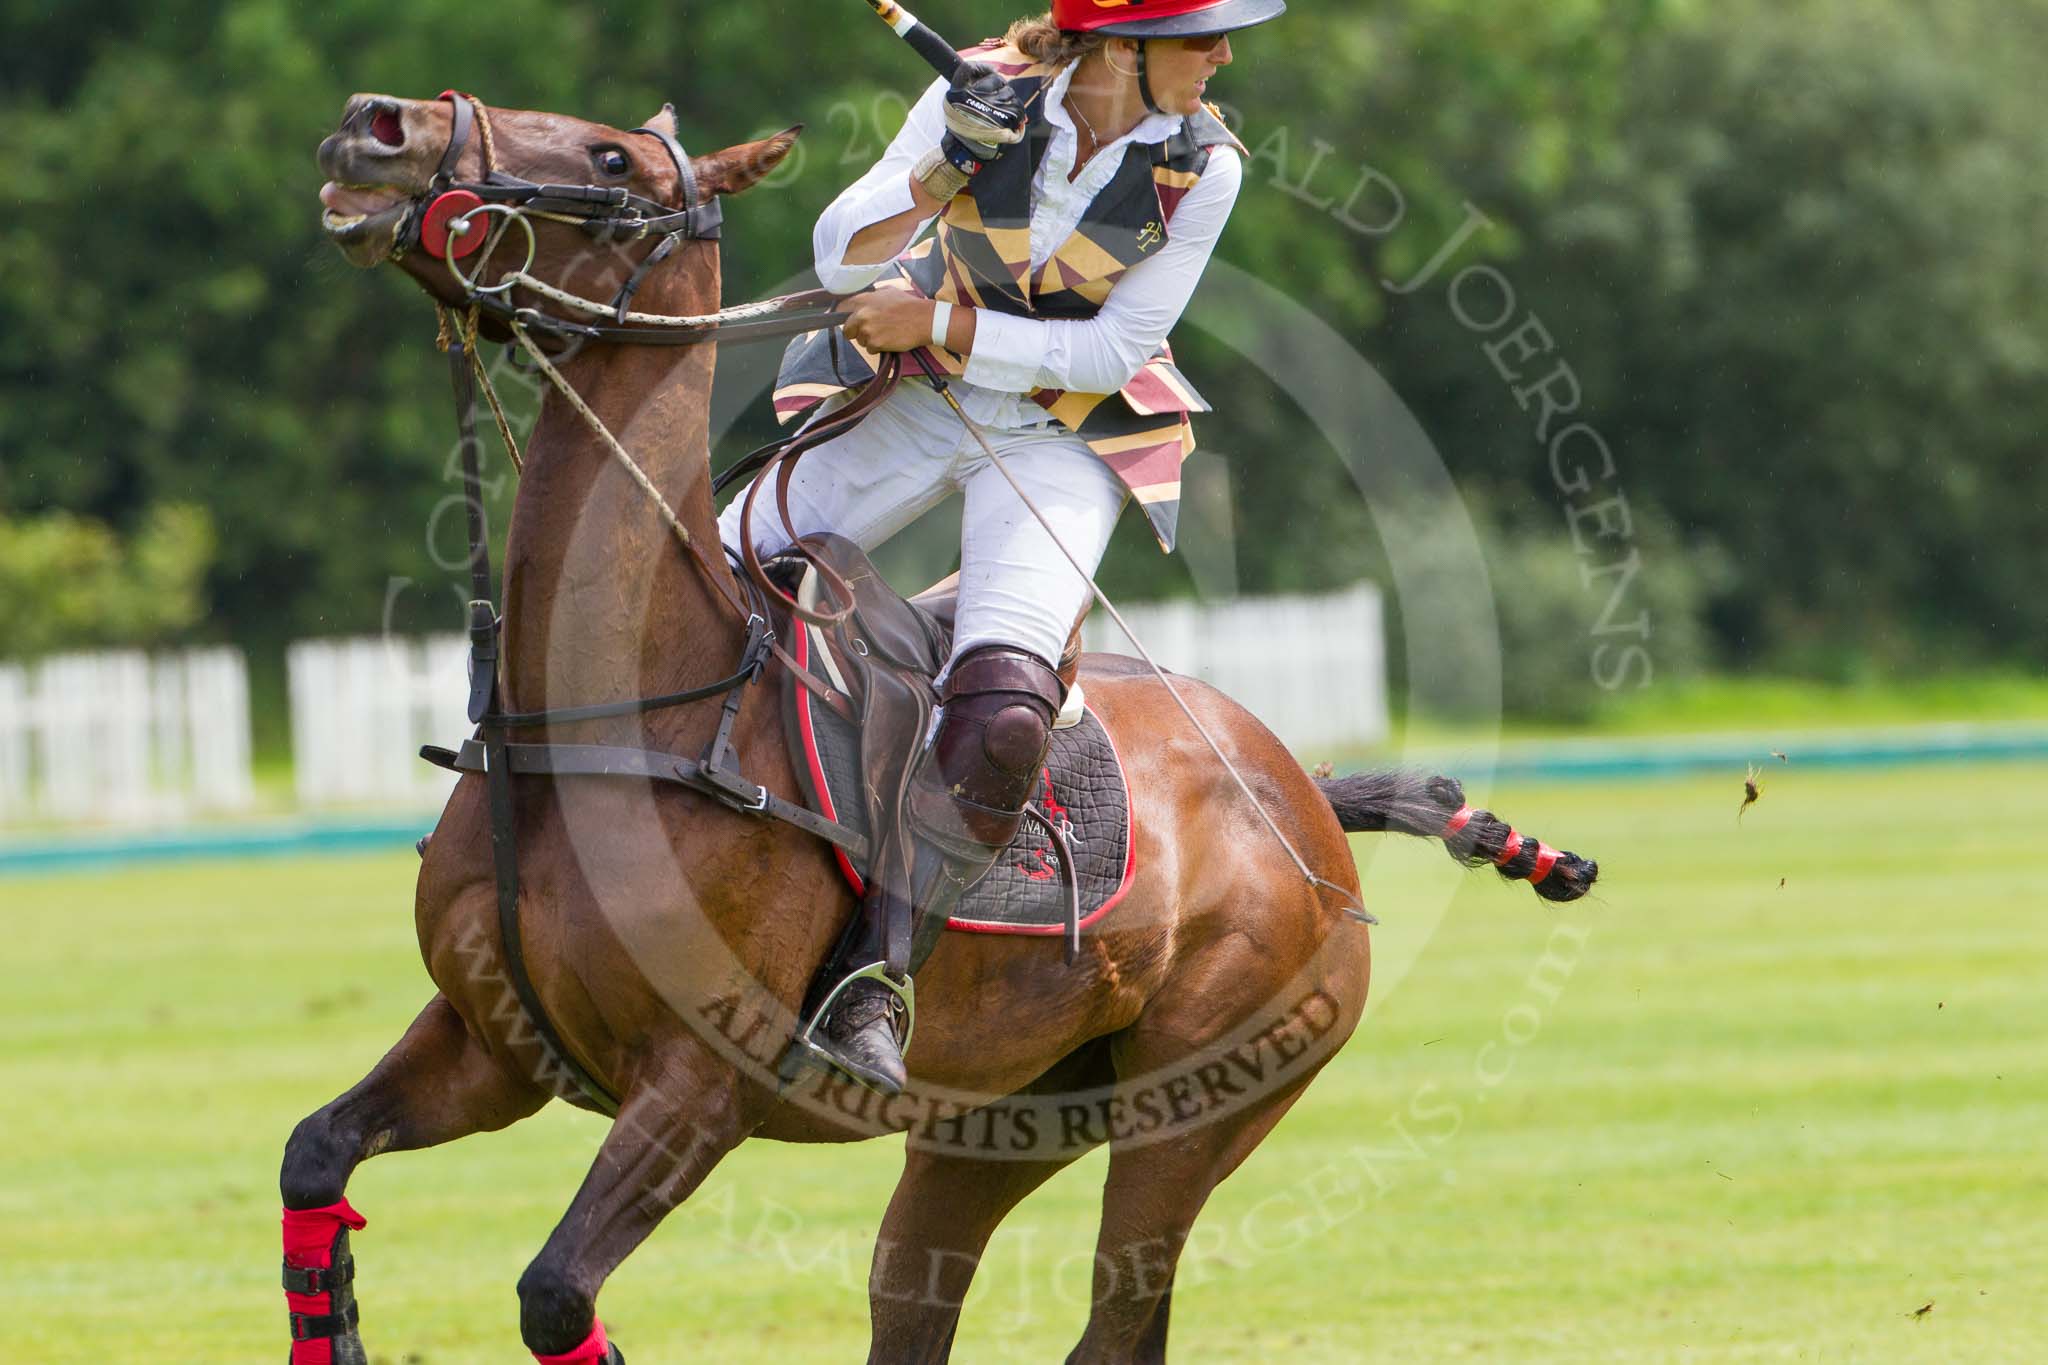 7th Heritage Polo Cup semi-finals: Sarah Wisman looking back at her nearside back shot and pass to her Team mate of..
Hurtwood Park Polo Club,
Ewhurst Green,
Surrey,
United Kingdom,
on 04 August 2012 at 13:35, image #160